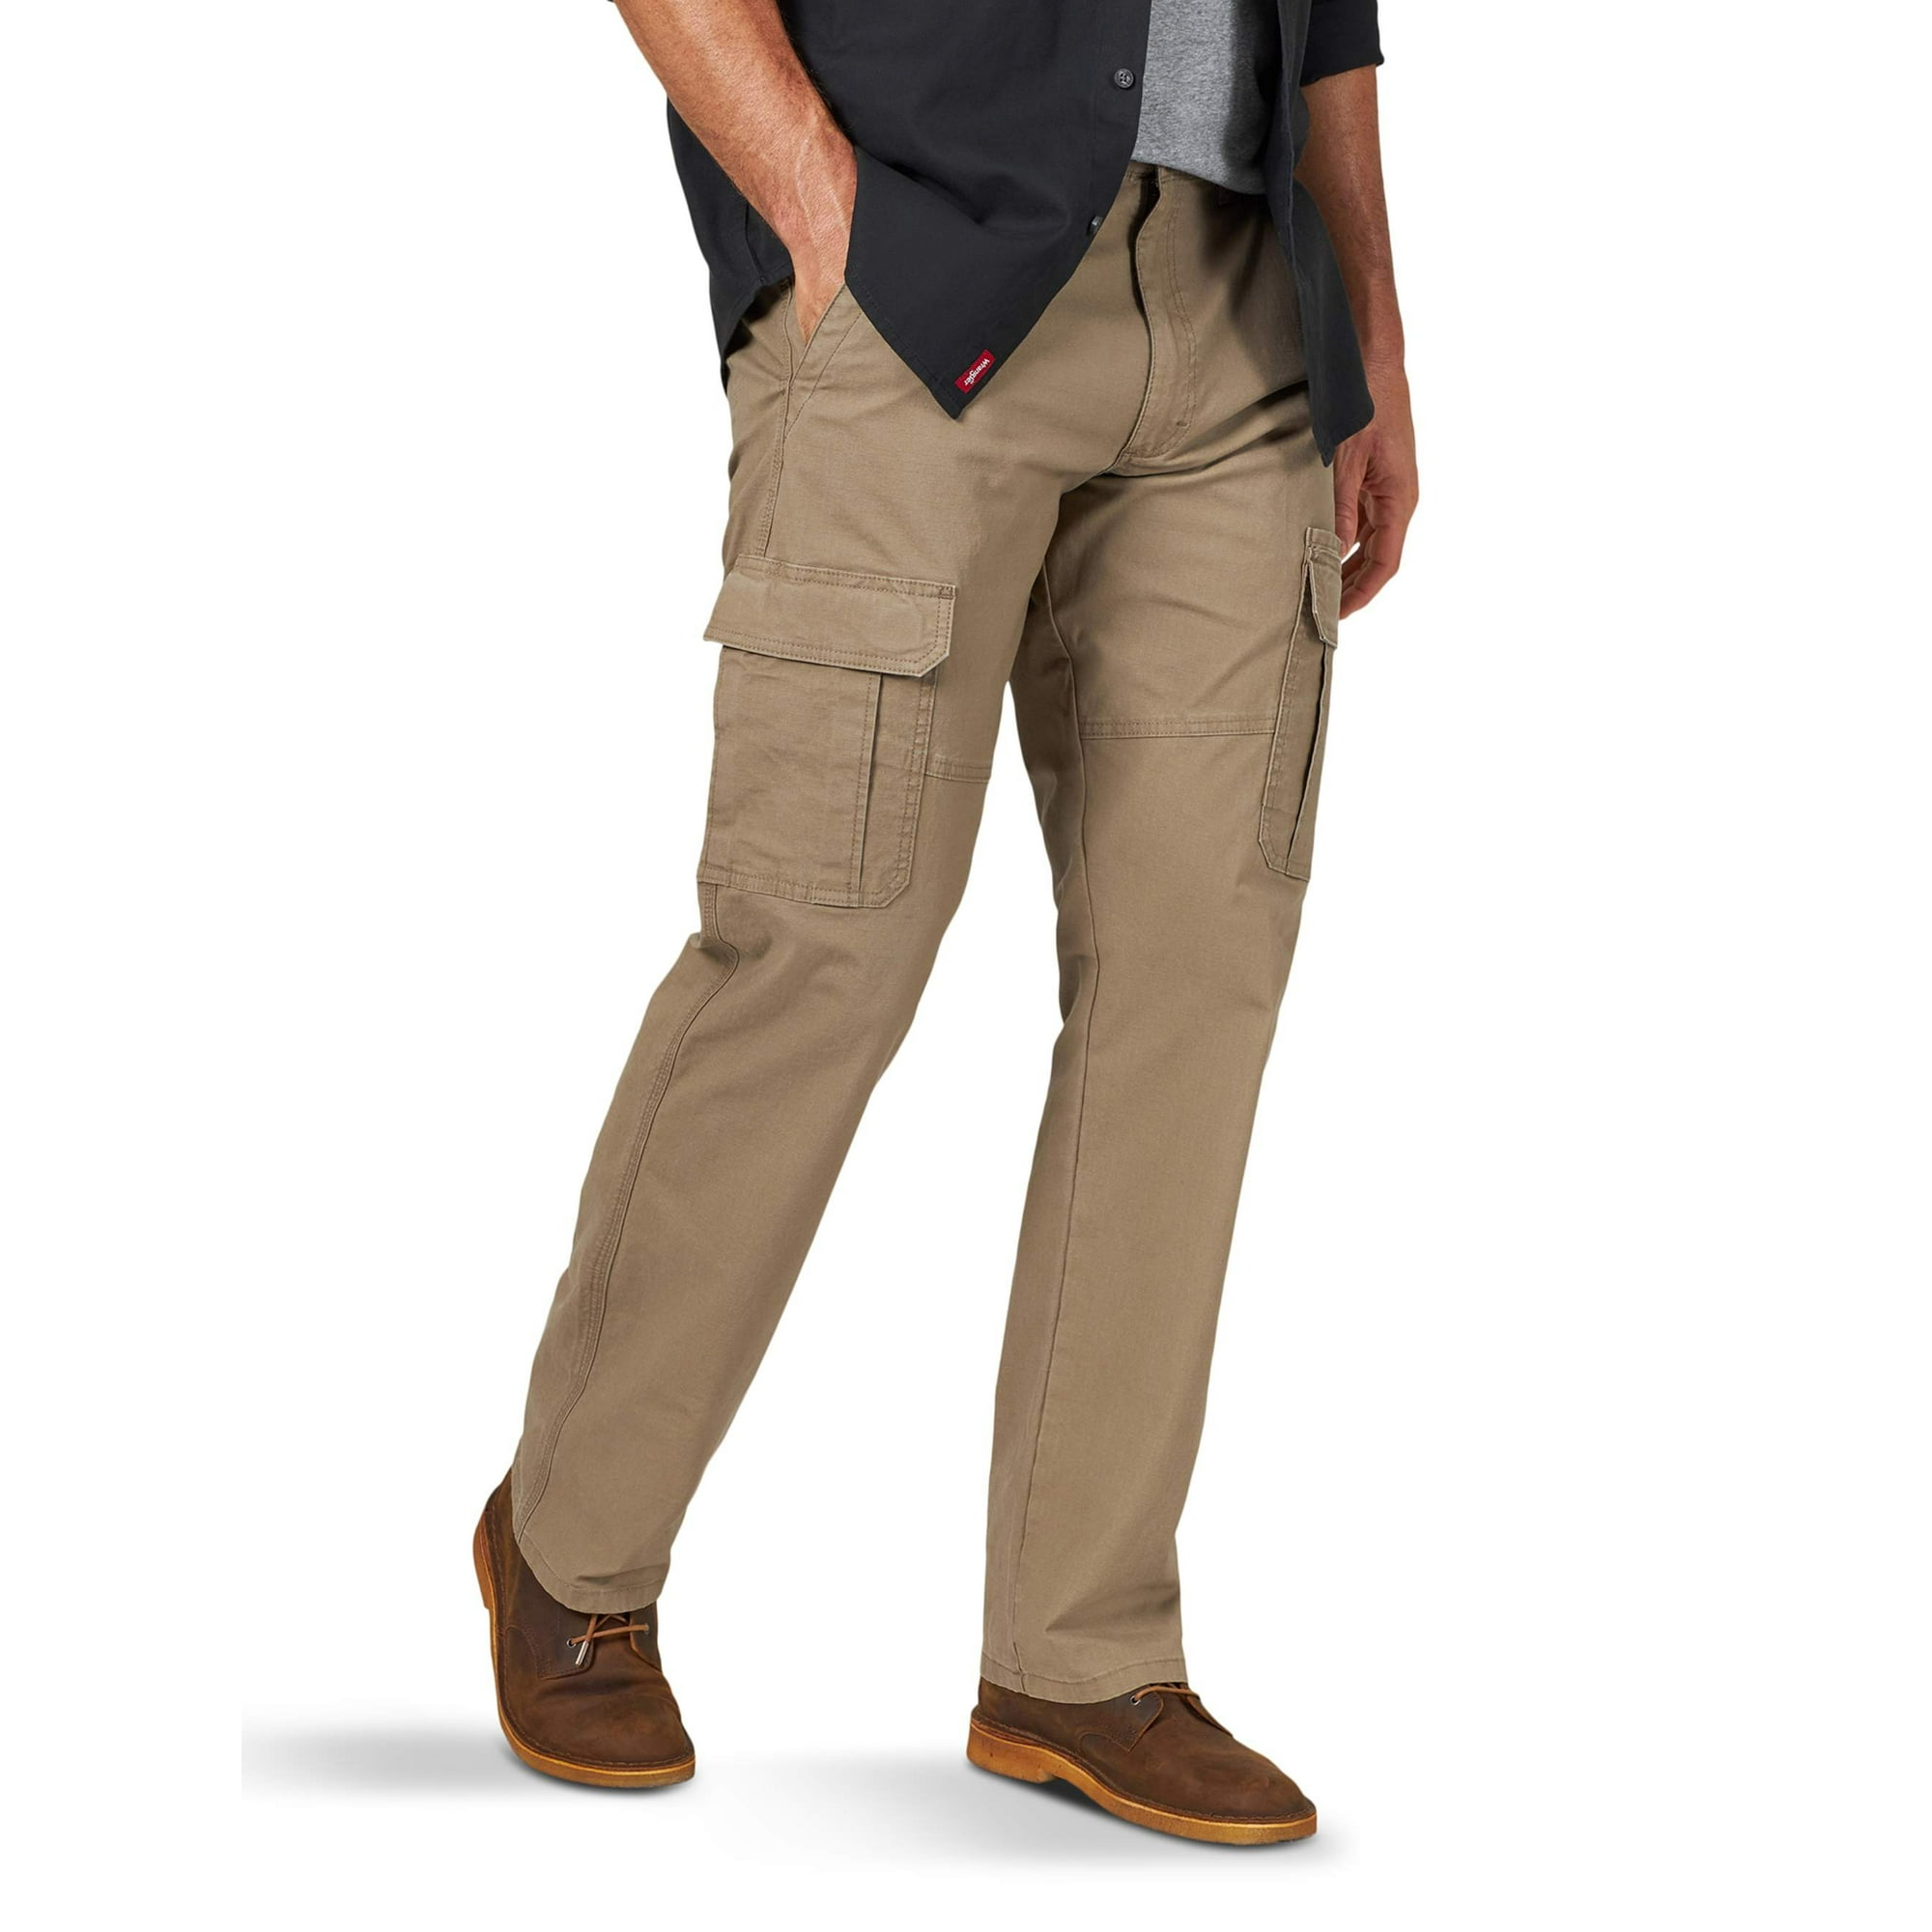 Wrangler and Big Men's Relaxed Fit Cargo Pants With Stretch - Walmart.com